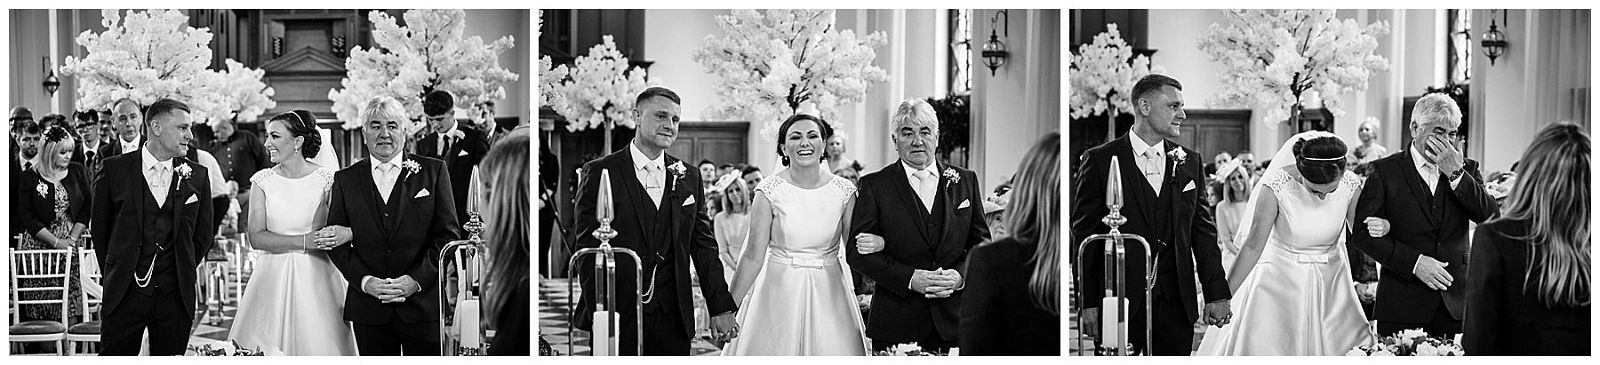 Photographs that capture the story and emotion as the bridal party make their entrance to the wedding ceremony in the Chapel at Hawkstone Hall in Shrewsbury by Documentary Wedding Photographer Stuart James